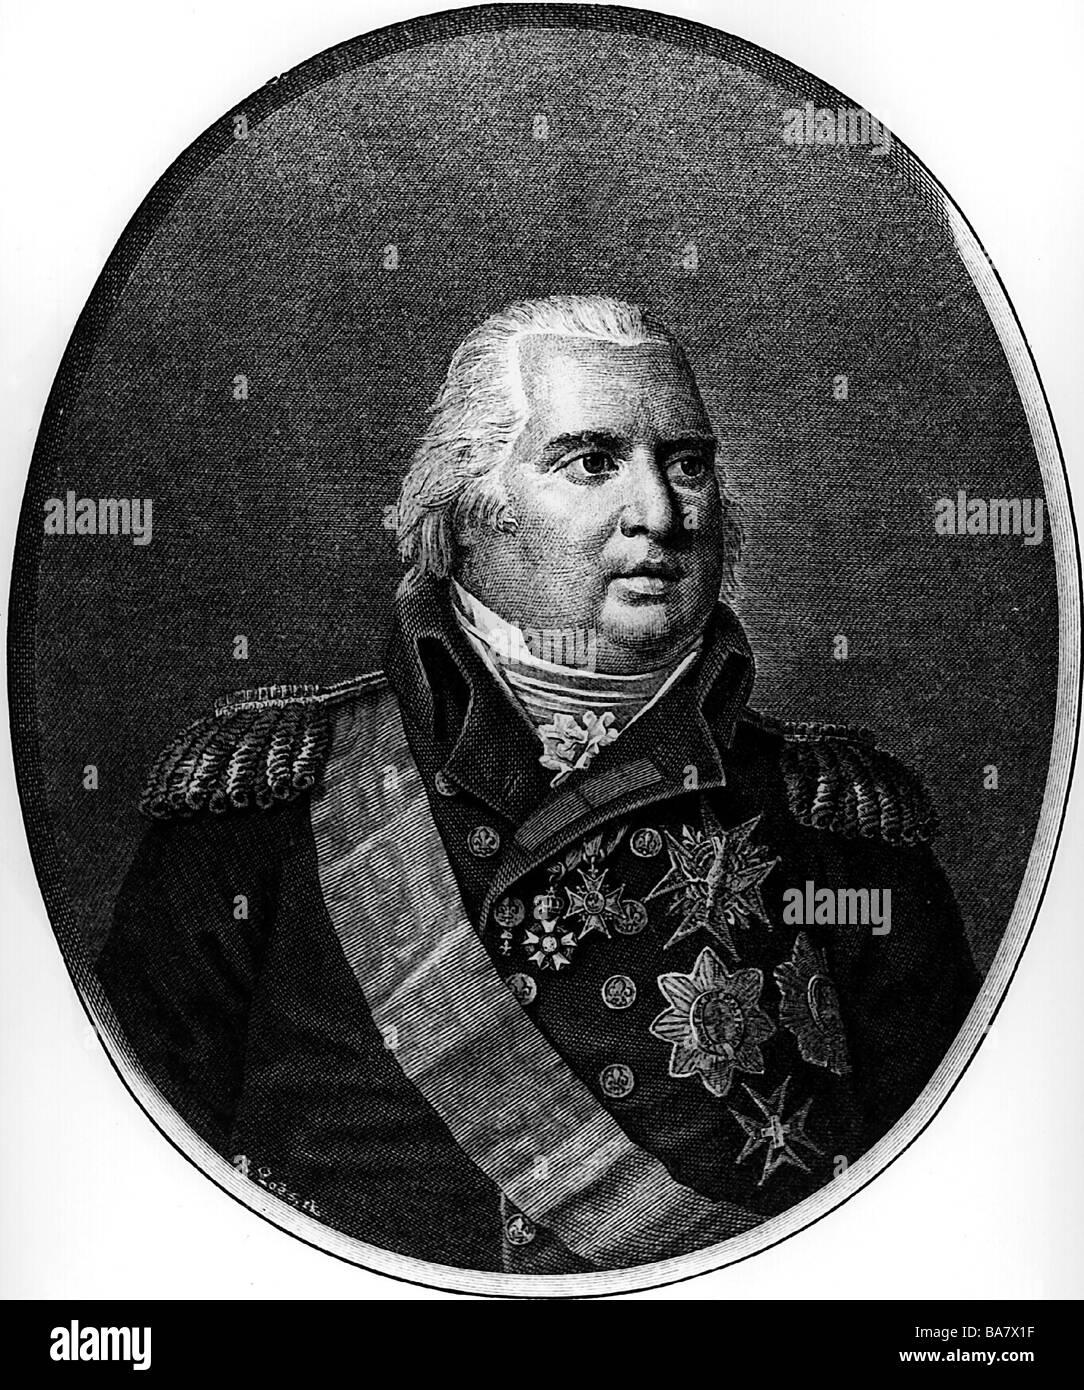 Louis XVIII, 17.11.1755 - 16.9.1824, King of France 2.4.1814 - 16.9.1824, portrait, copper engraving by Andonin after drawing by Bouillon, 19th century, Artist's Copyright has not to be cleared Stock Photo